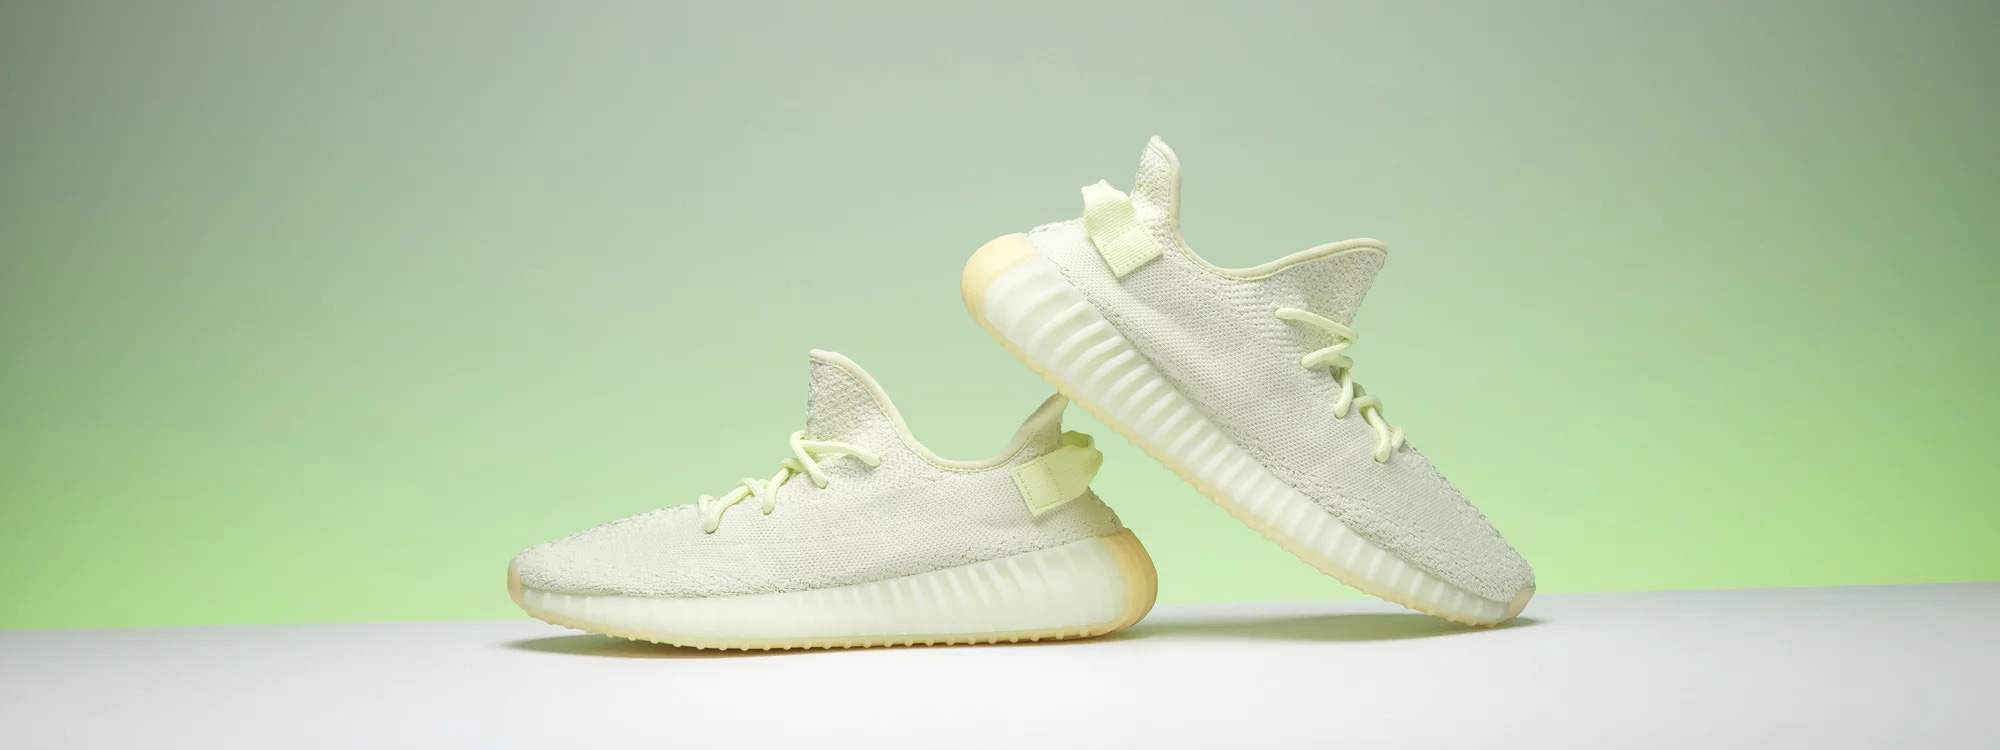 Womens Adidas Yeezy Boost 350 V2 Butter sneakers online